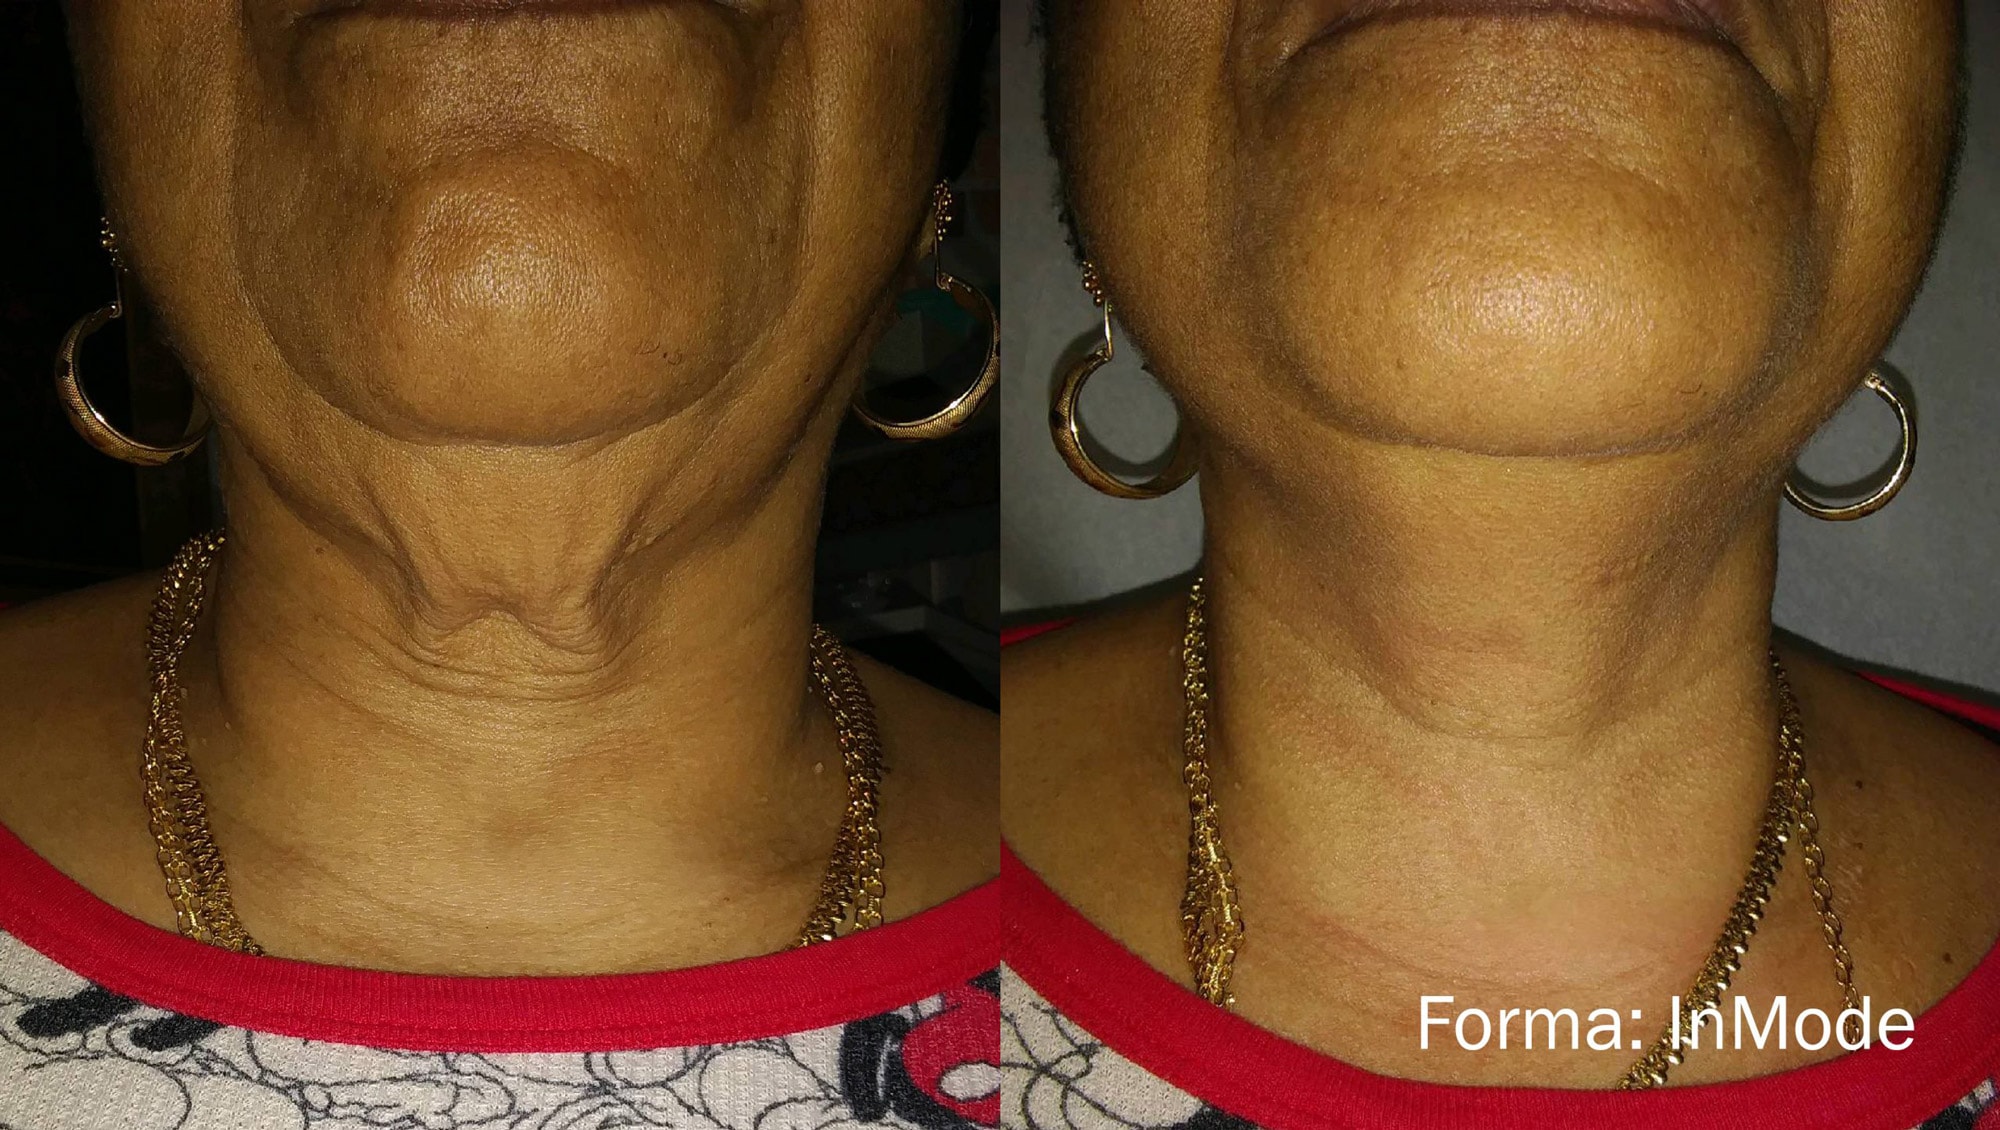 Before and After photos of Forma treatments tightening wrinkles and loose skin on a woman’s neck and chin